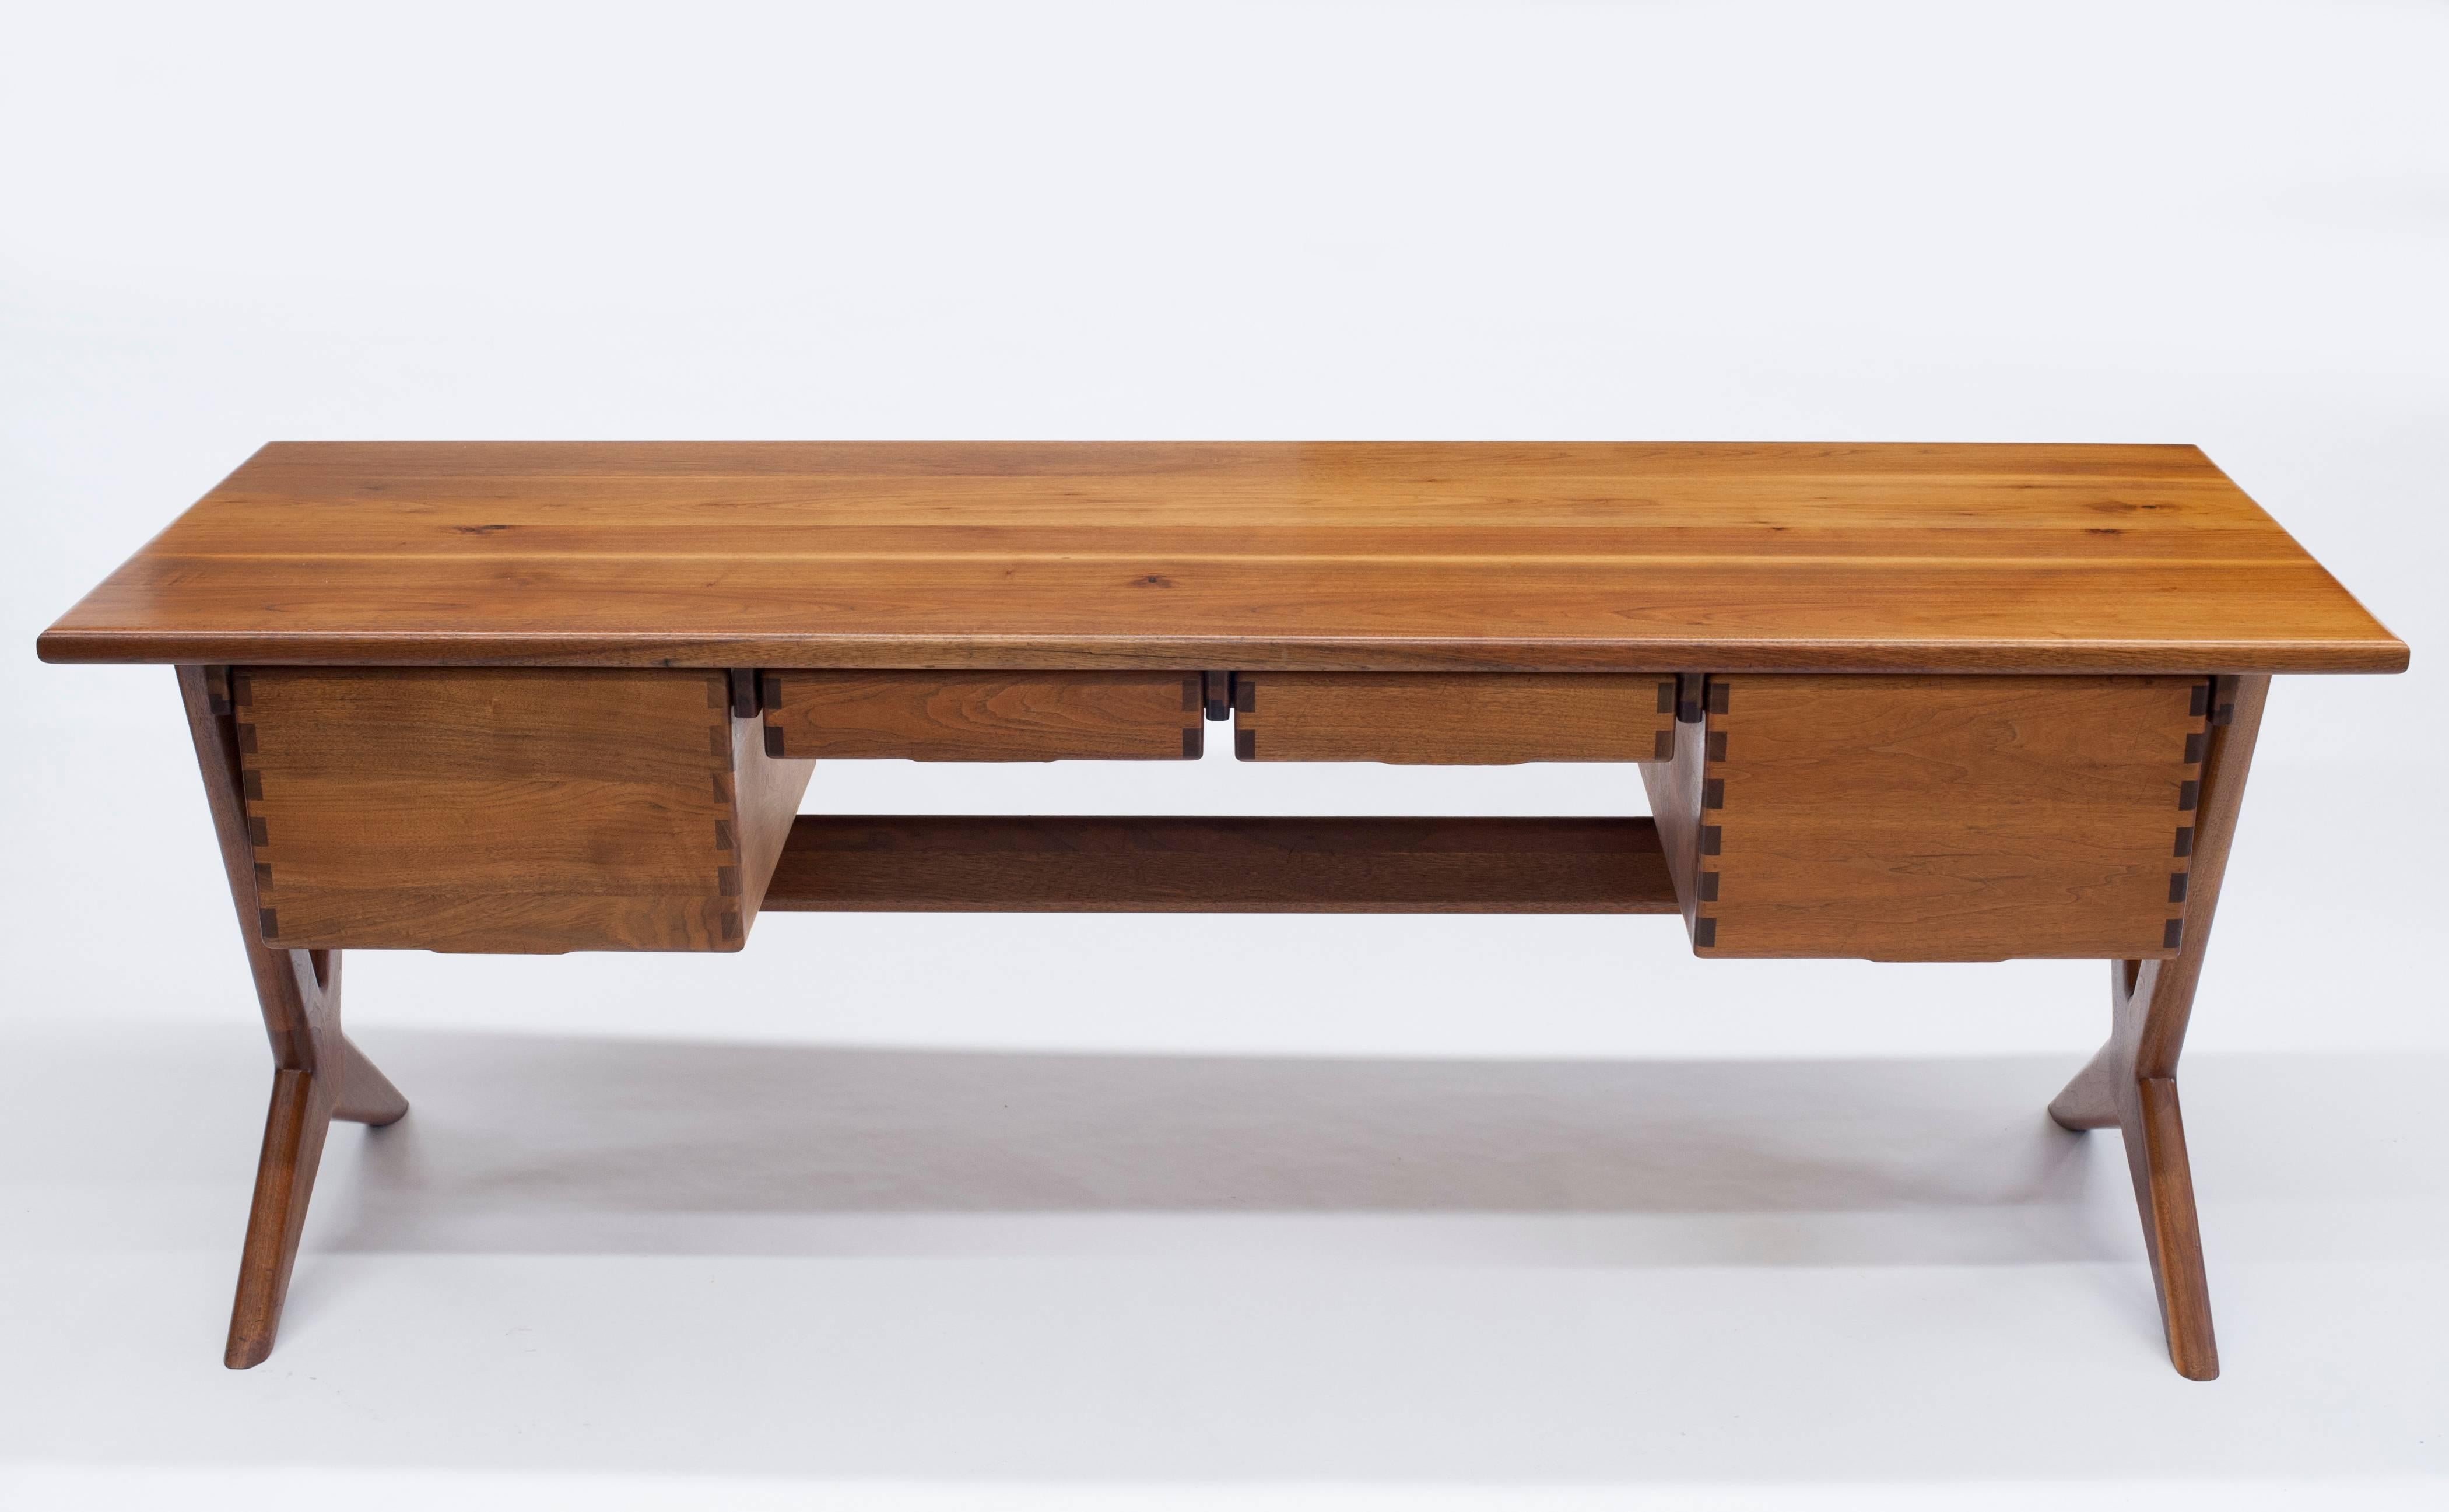 1970s custom desk for the Esprit offices in San Francisco by MIT graduate and California master craftsman Jim Sweeney. Constructed with solid walnut top, drawers, trestle and angled legs. Designed with beautiful and bold joinery. This is the largest